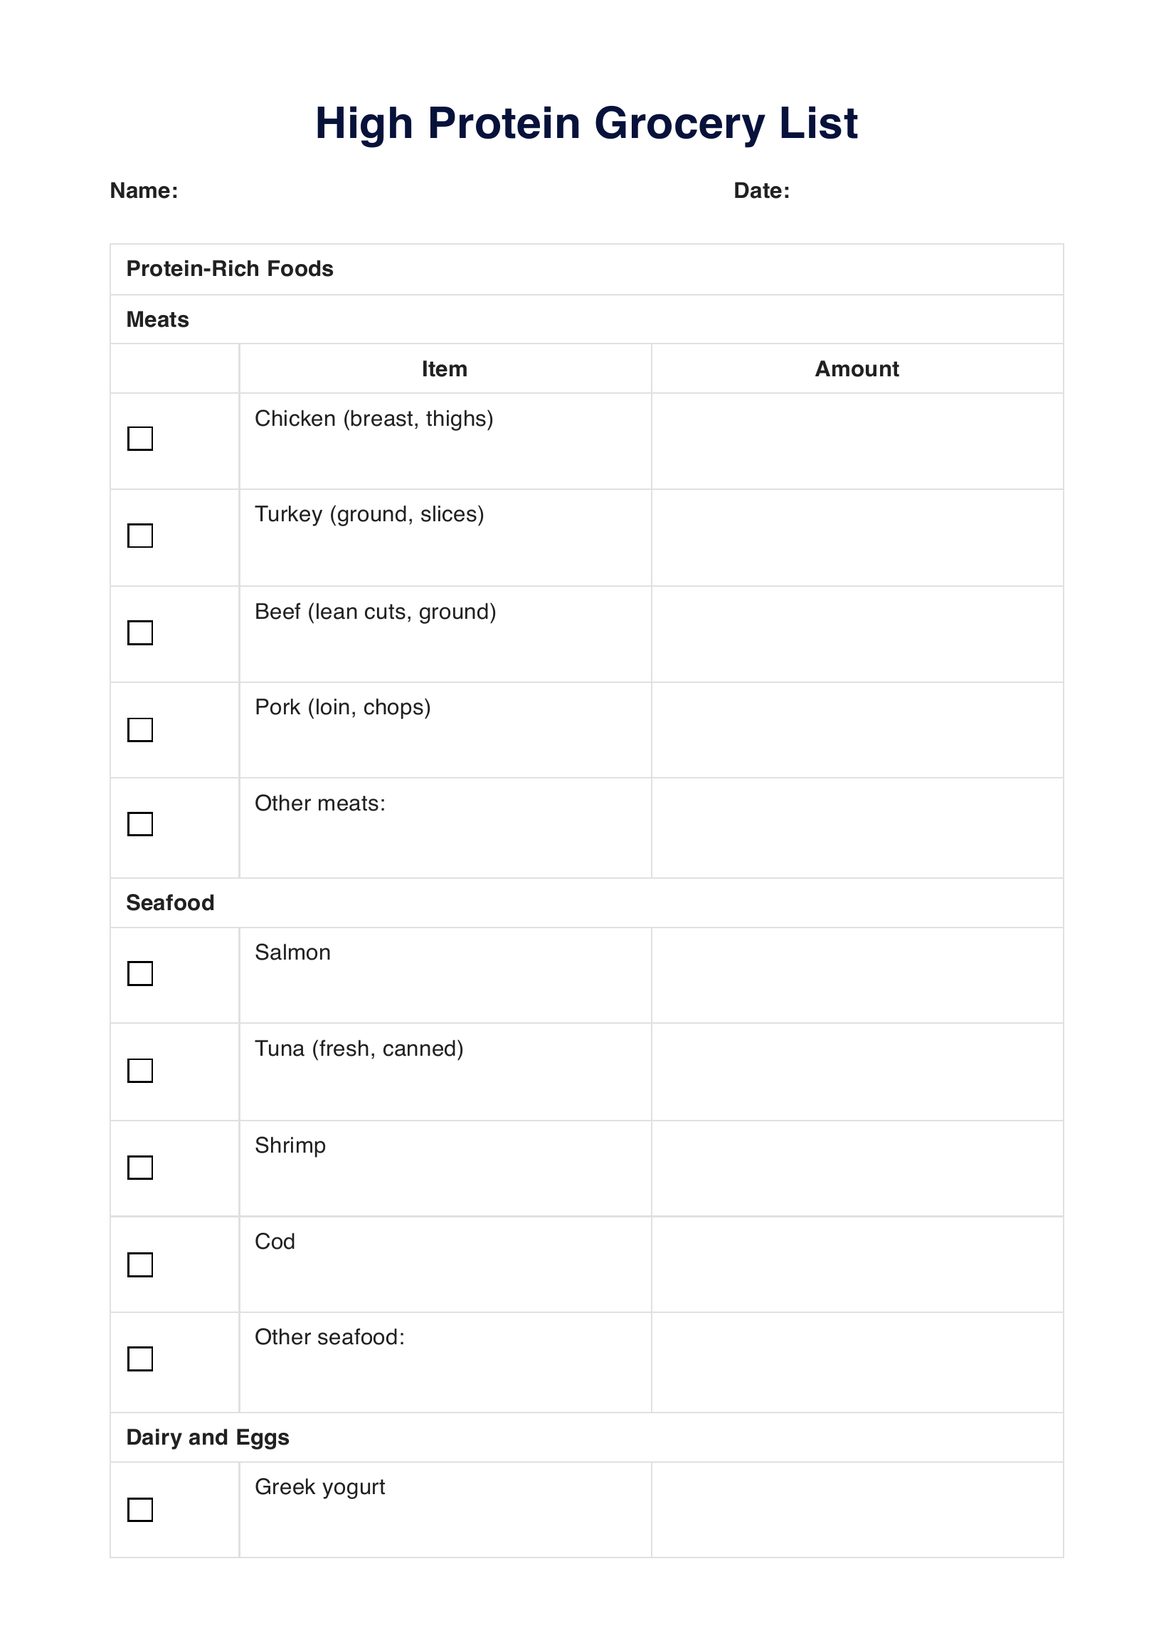 High Protein Grocery List PDF Example